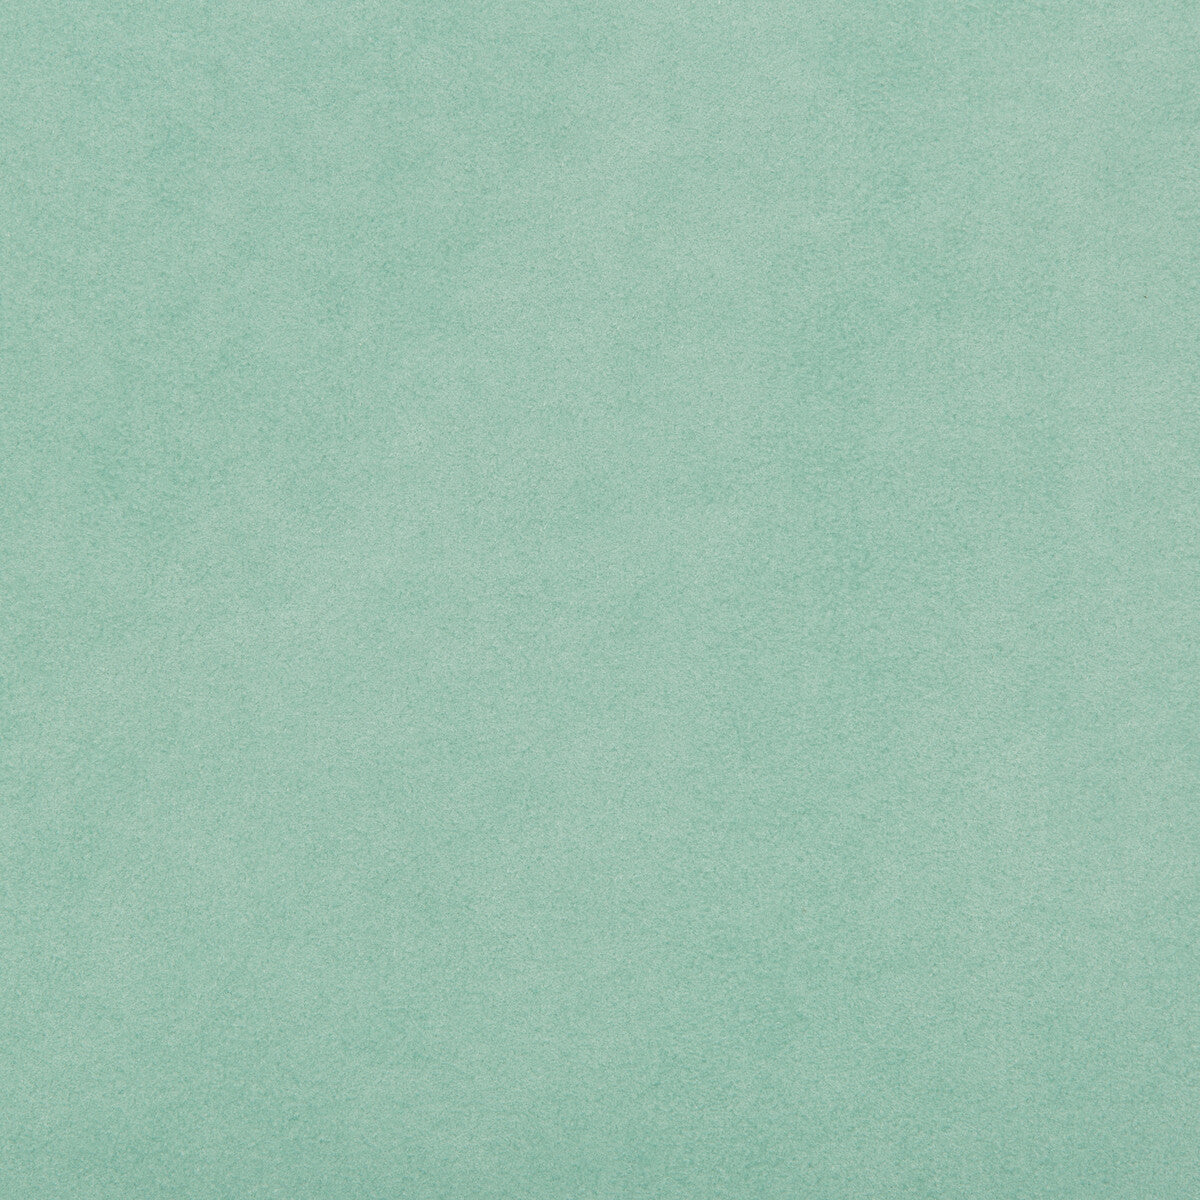 Ultrasuede Green fabric in seafoam color - pattern 30787.113.0 - by Kravet Design in the Performance collection